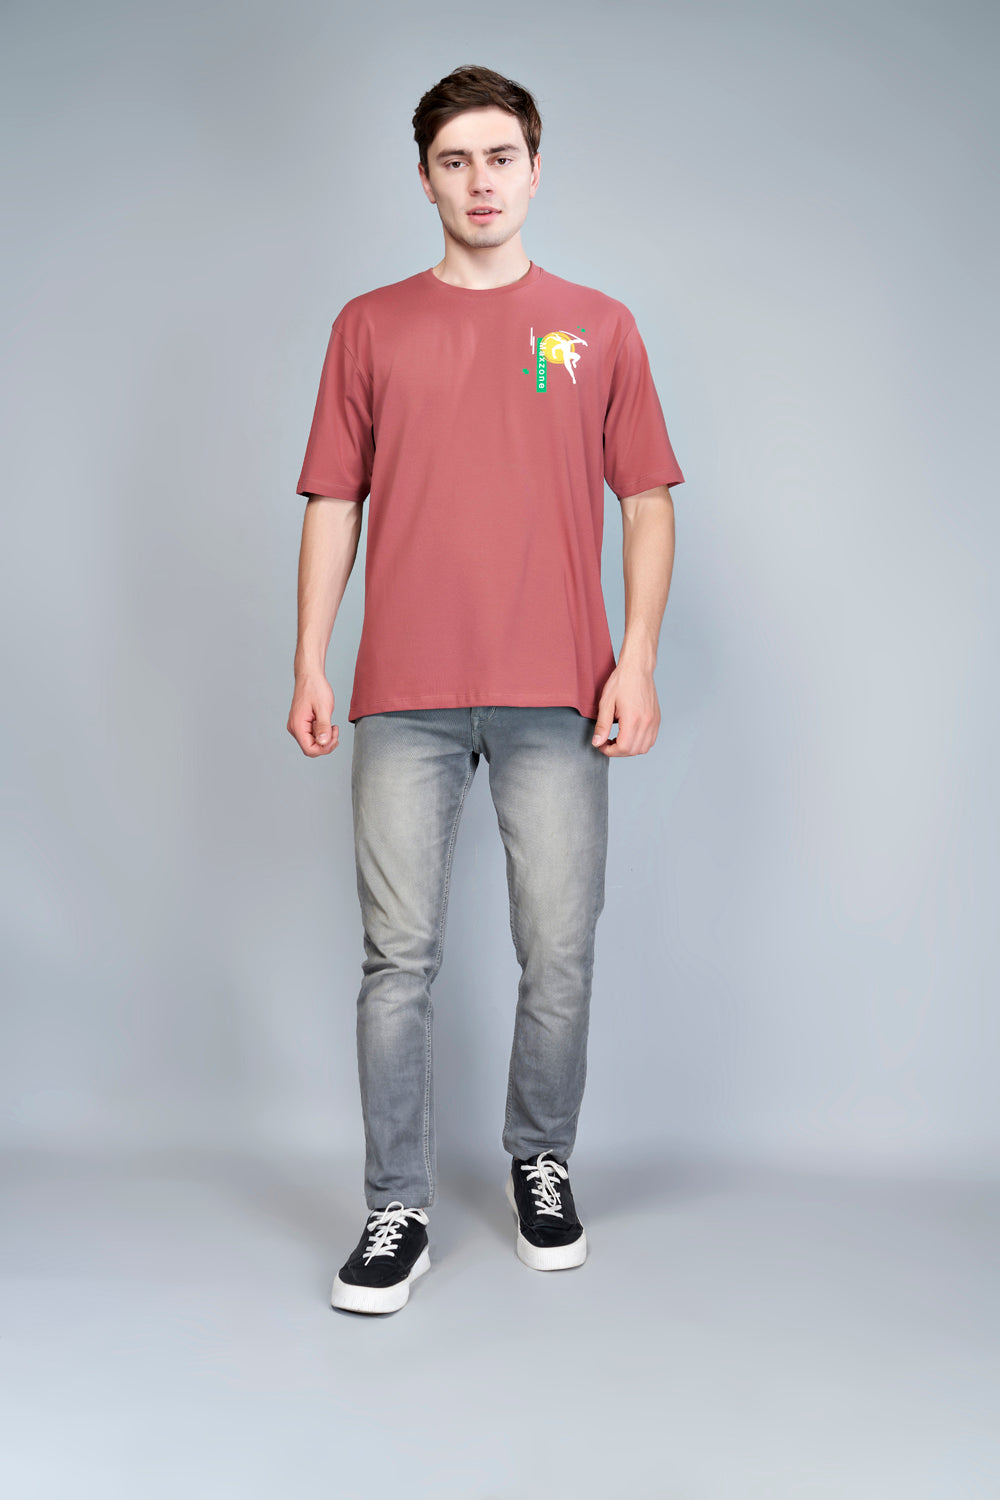 Cotton oversized T shirt for men in the solid color Rose Gold with half sleeves and crew neck, front view.